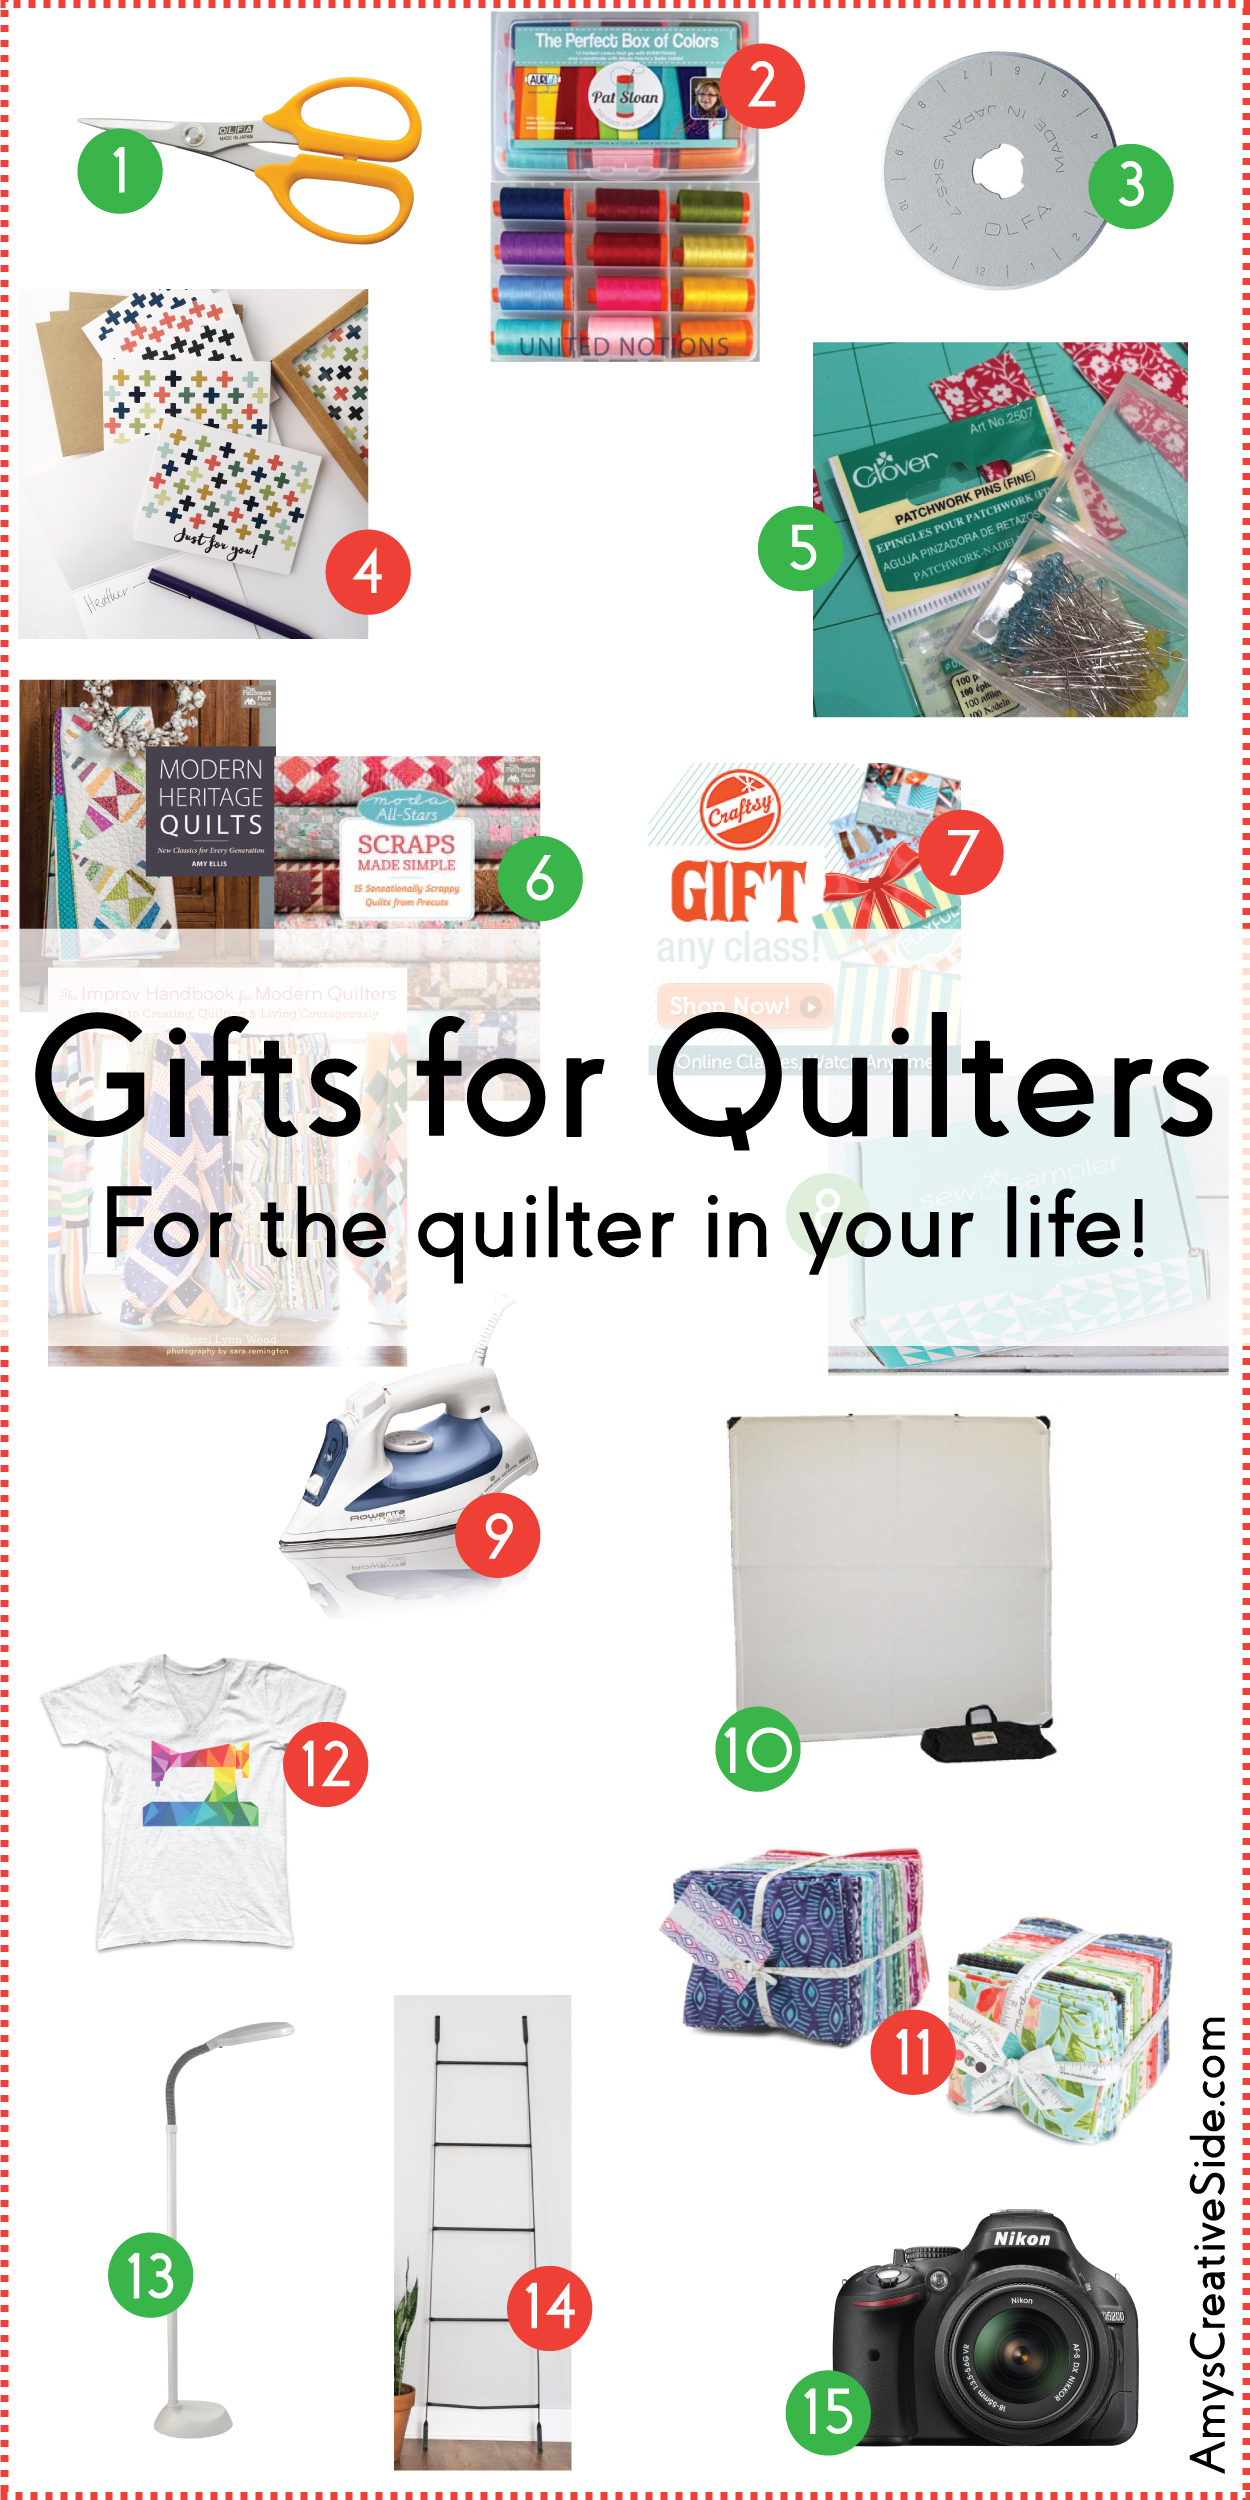 Gifts for Quilters  Amy's Creative Side